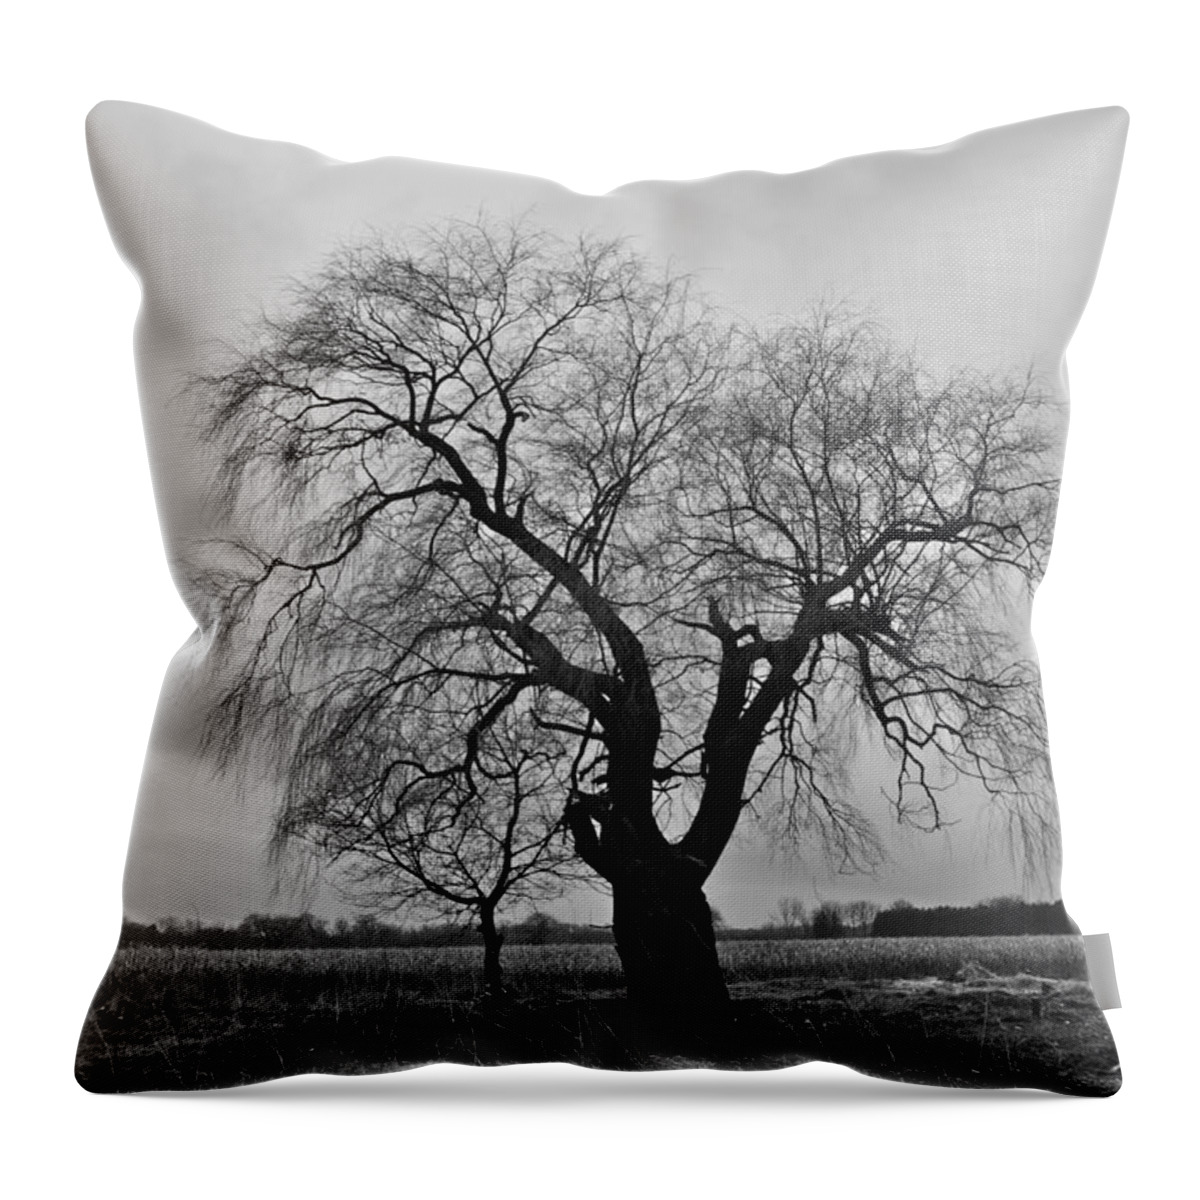 Tree Throw Pillow featuring the photograph The Fall by Brooke Friendly